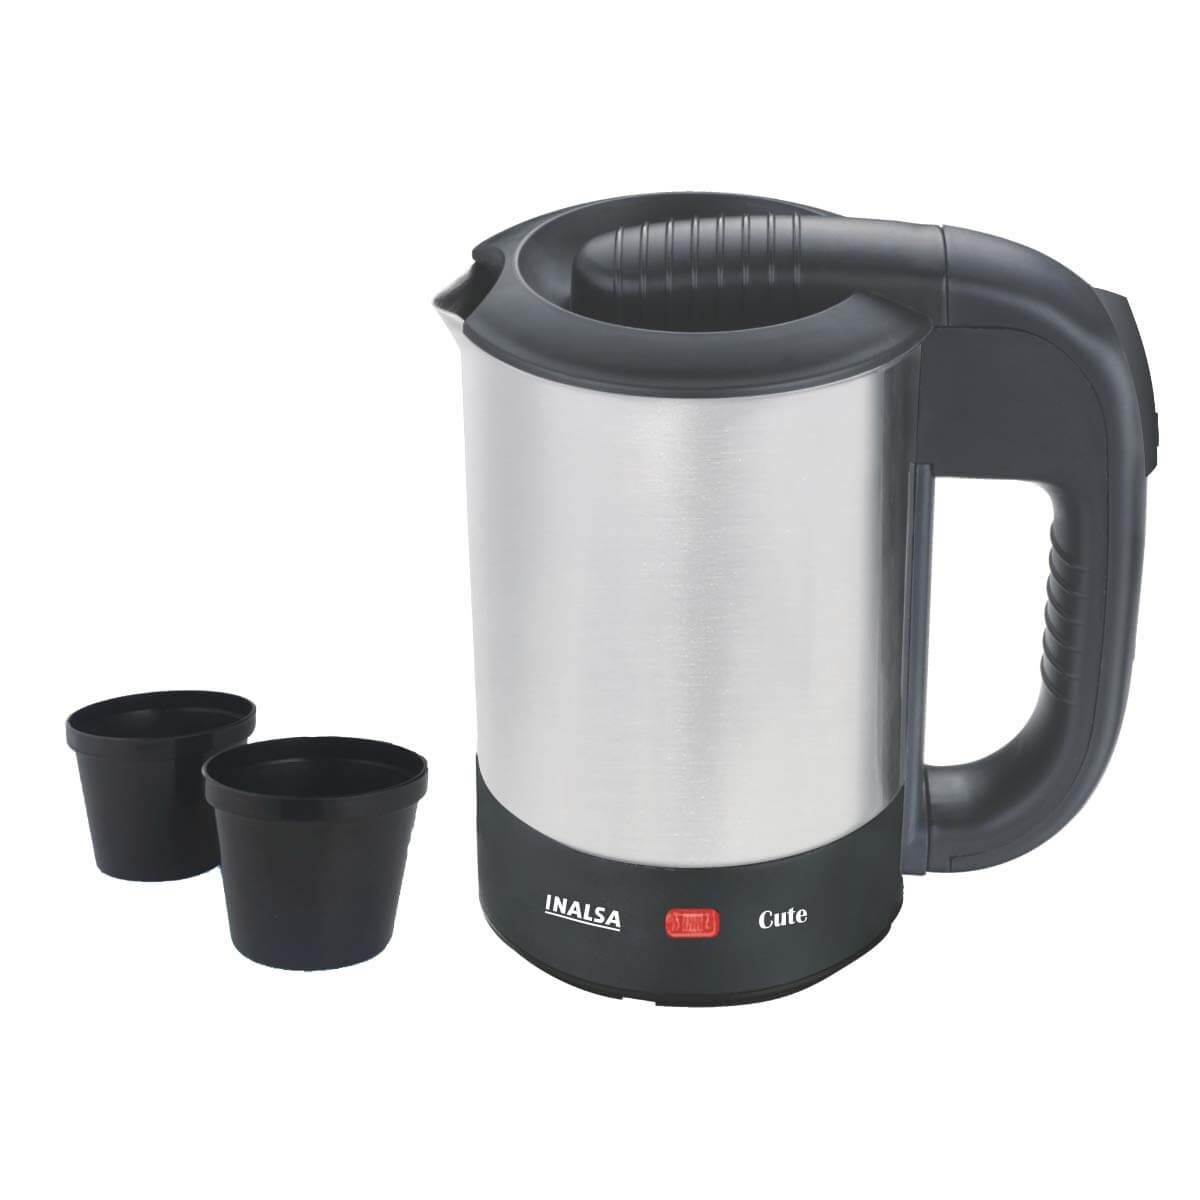 Best inalsa electric kettle